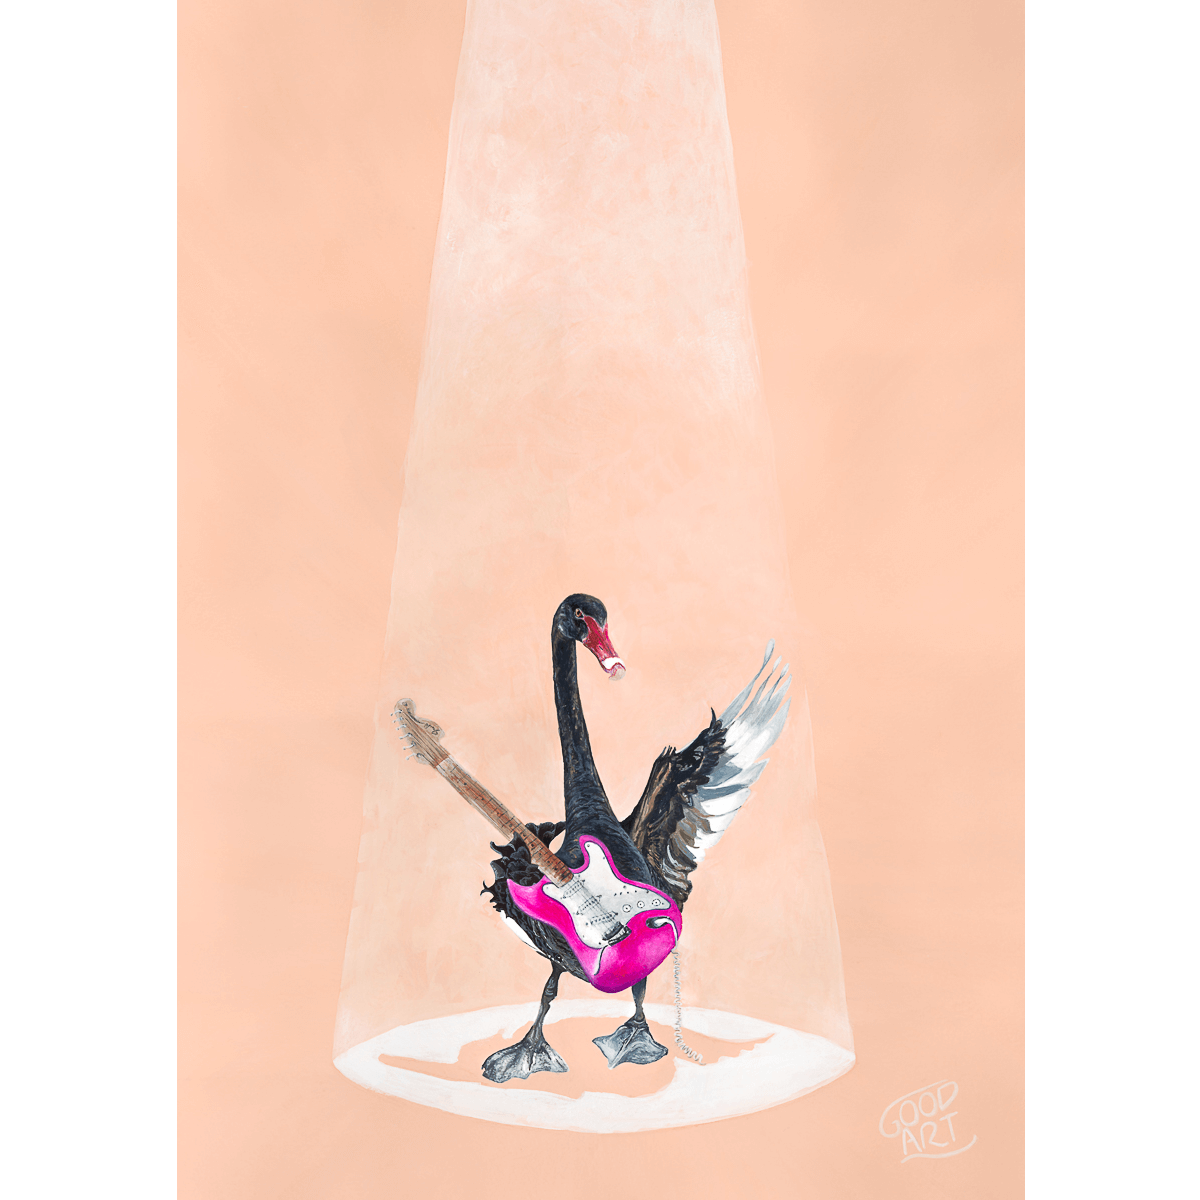 An Australian bird print of a black swan playing a pink electric guitar on blush coloured background. Kids wall hangings created by Good Art.